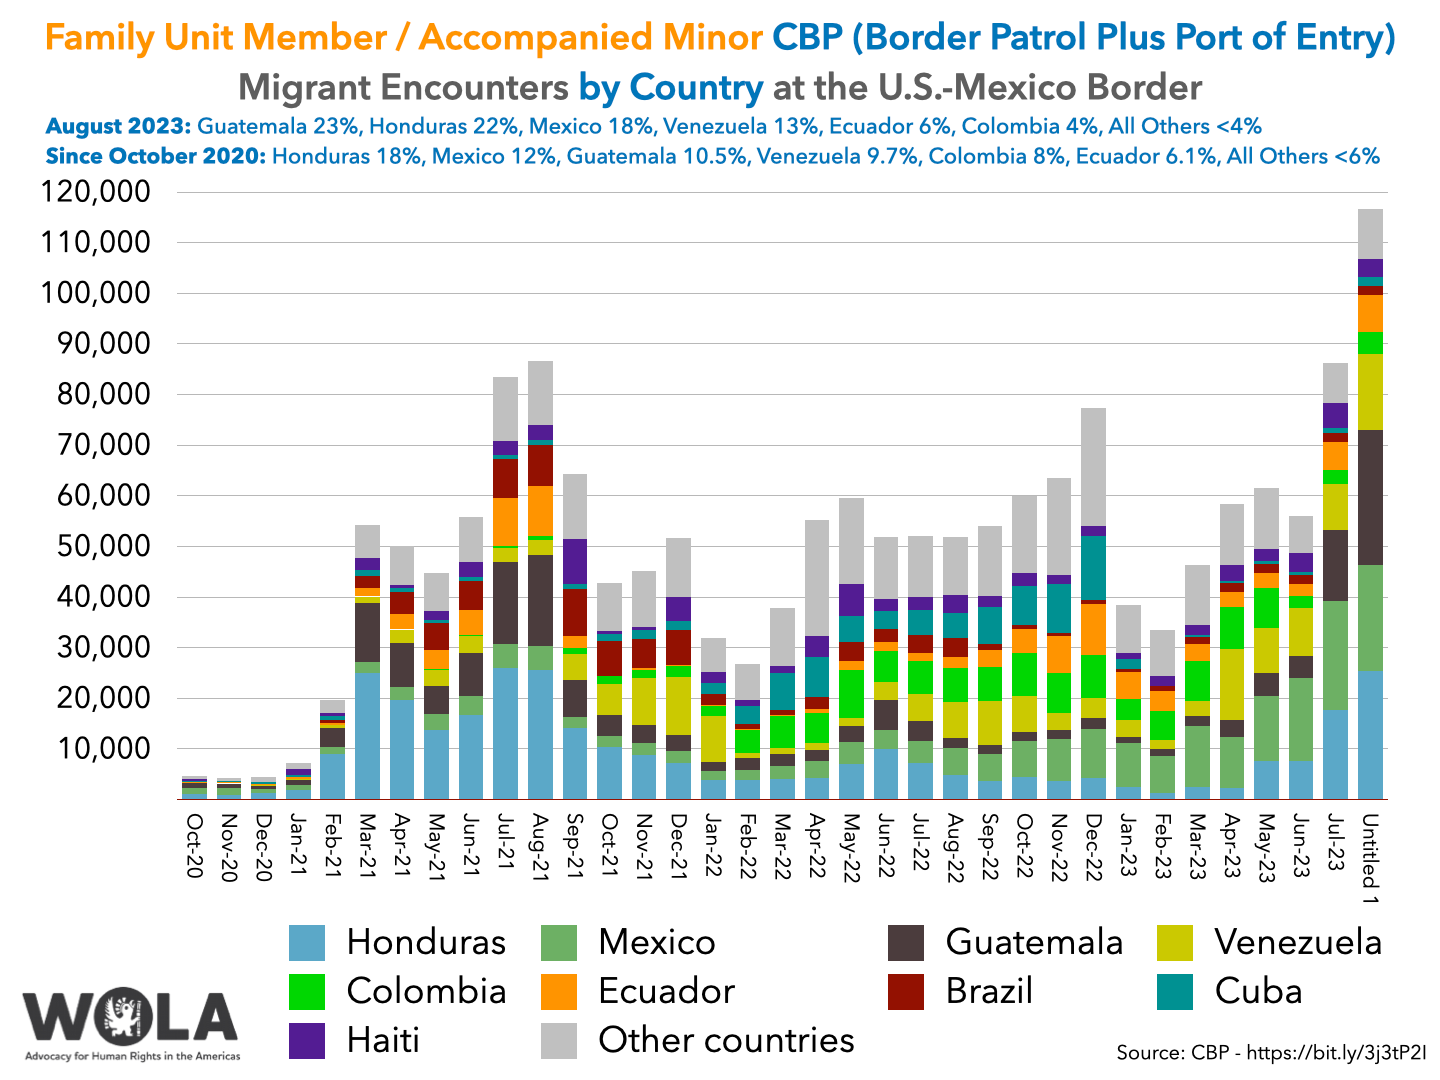 Chart: Family Unit Member / Accompanied Minor CBP (Border Patrol Plus Port of Entry) Migrant Encounters by Country at the U.S.-Mexico Border  August 2023: Guatemala 23%, Honduras 22%, Mexico 18%, Venezuela 13%, Ecuador 6%, Colombia 4%, All Others <4%  Since October 2020: Honduras 18%, Mexico 12%, Guatemala 10.5%, Venezuela 9.7%, Colombia 8%, Ecuador 6.1%, All Others <6%